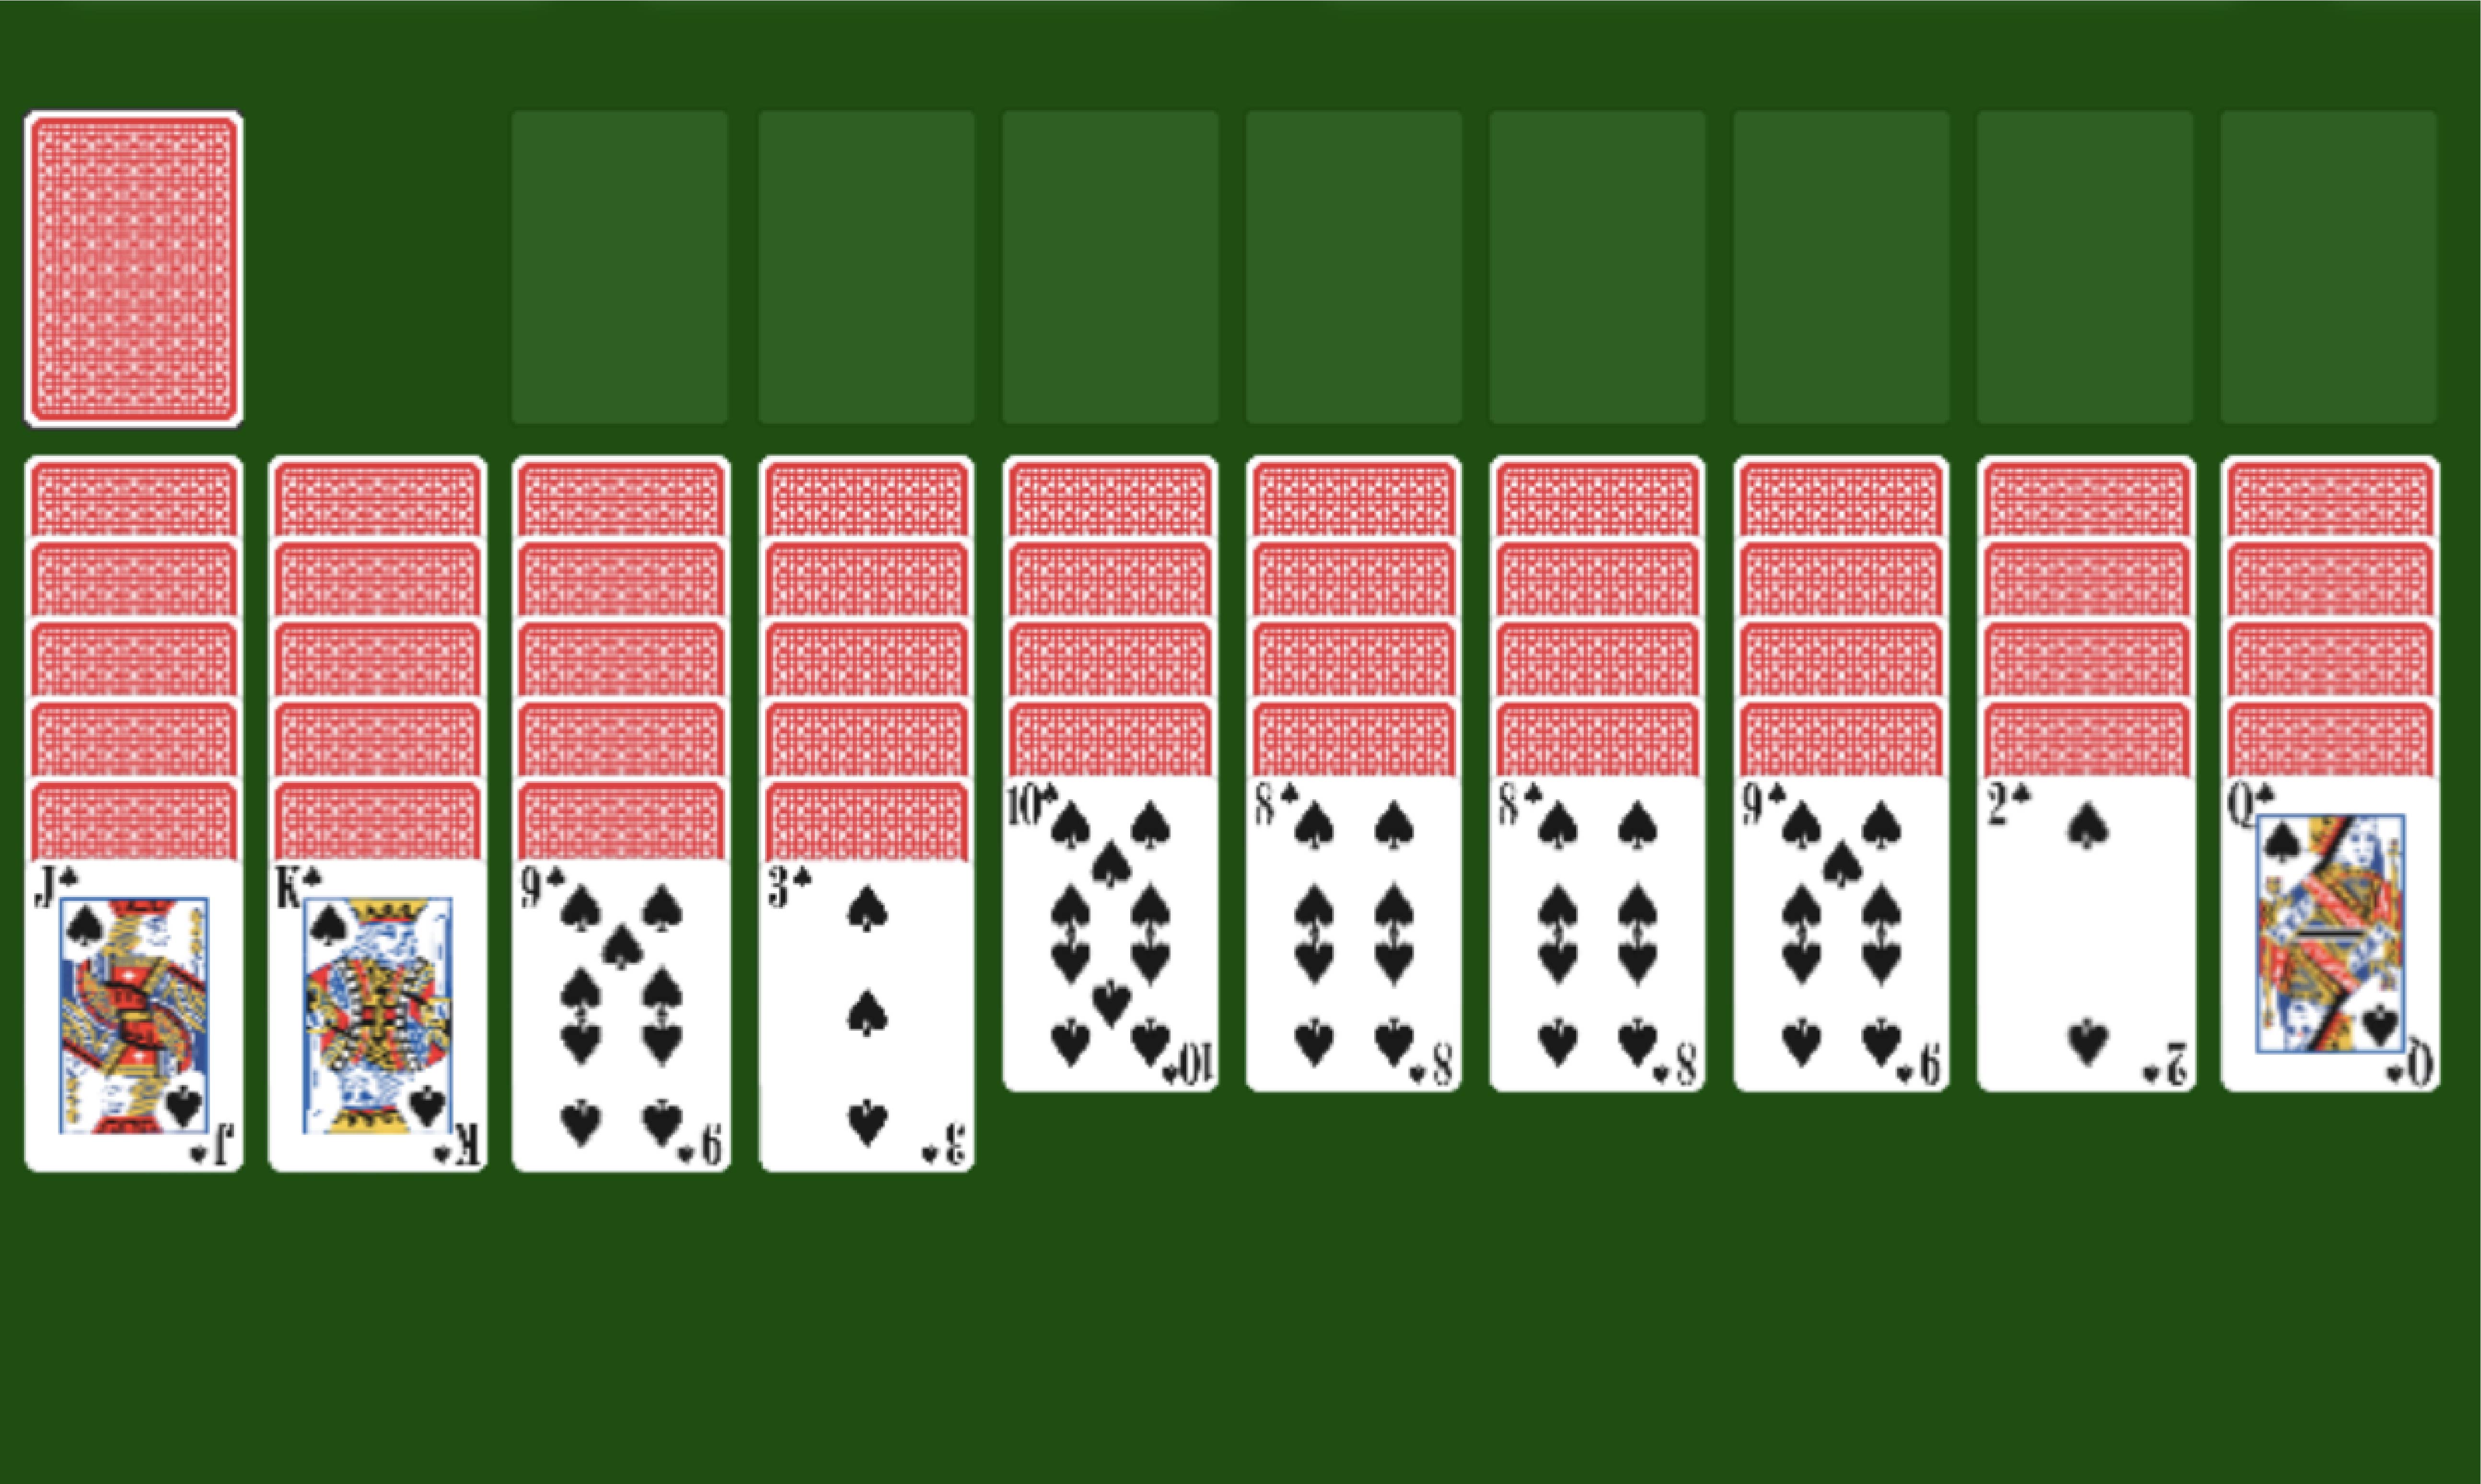 google free games spider solitaire